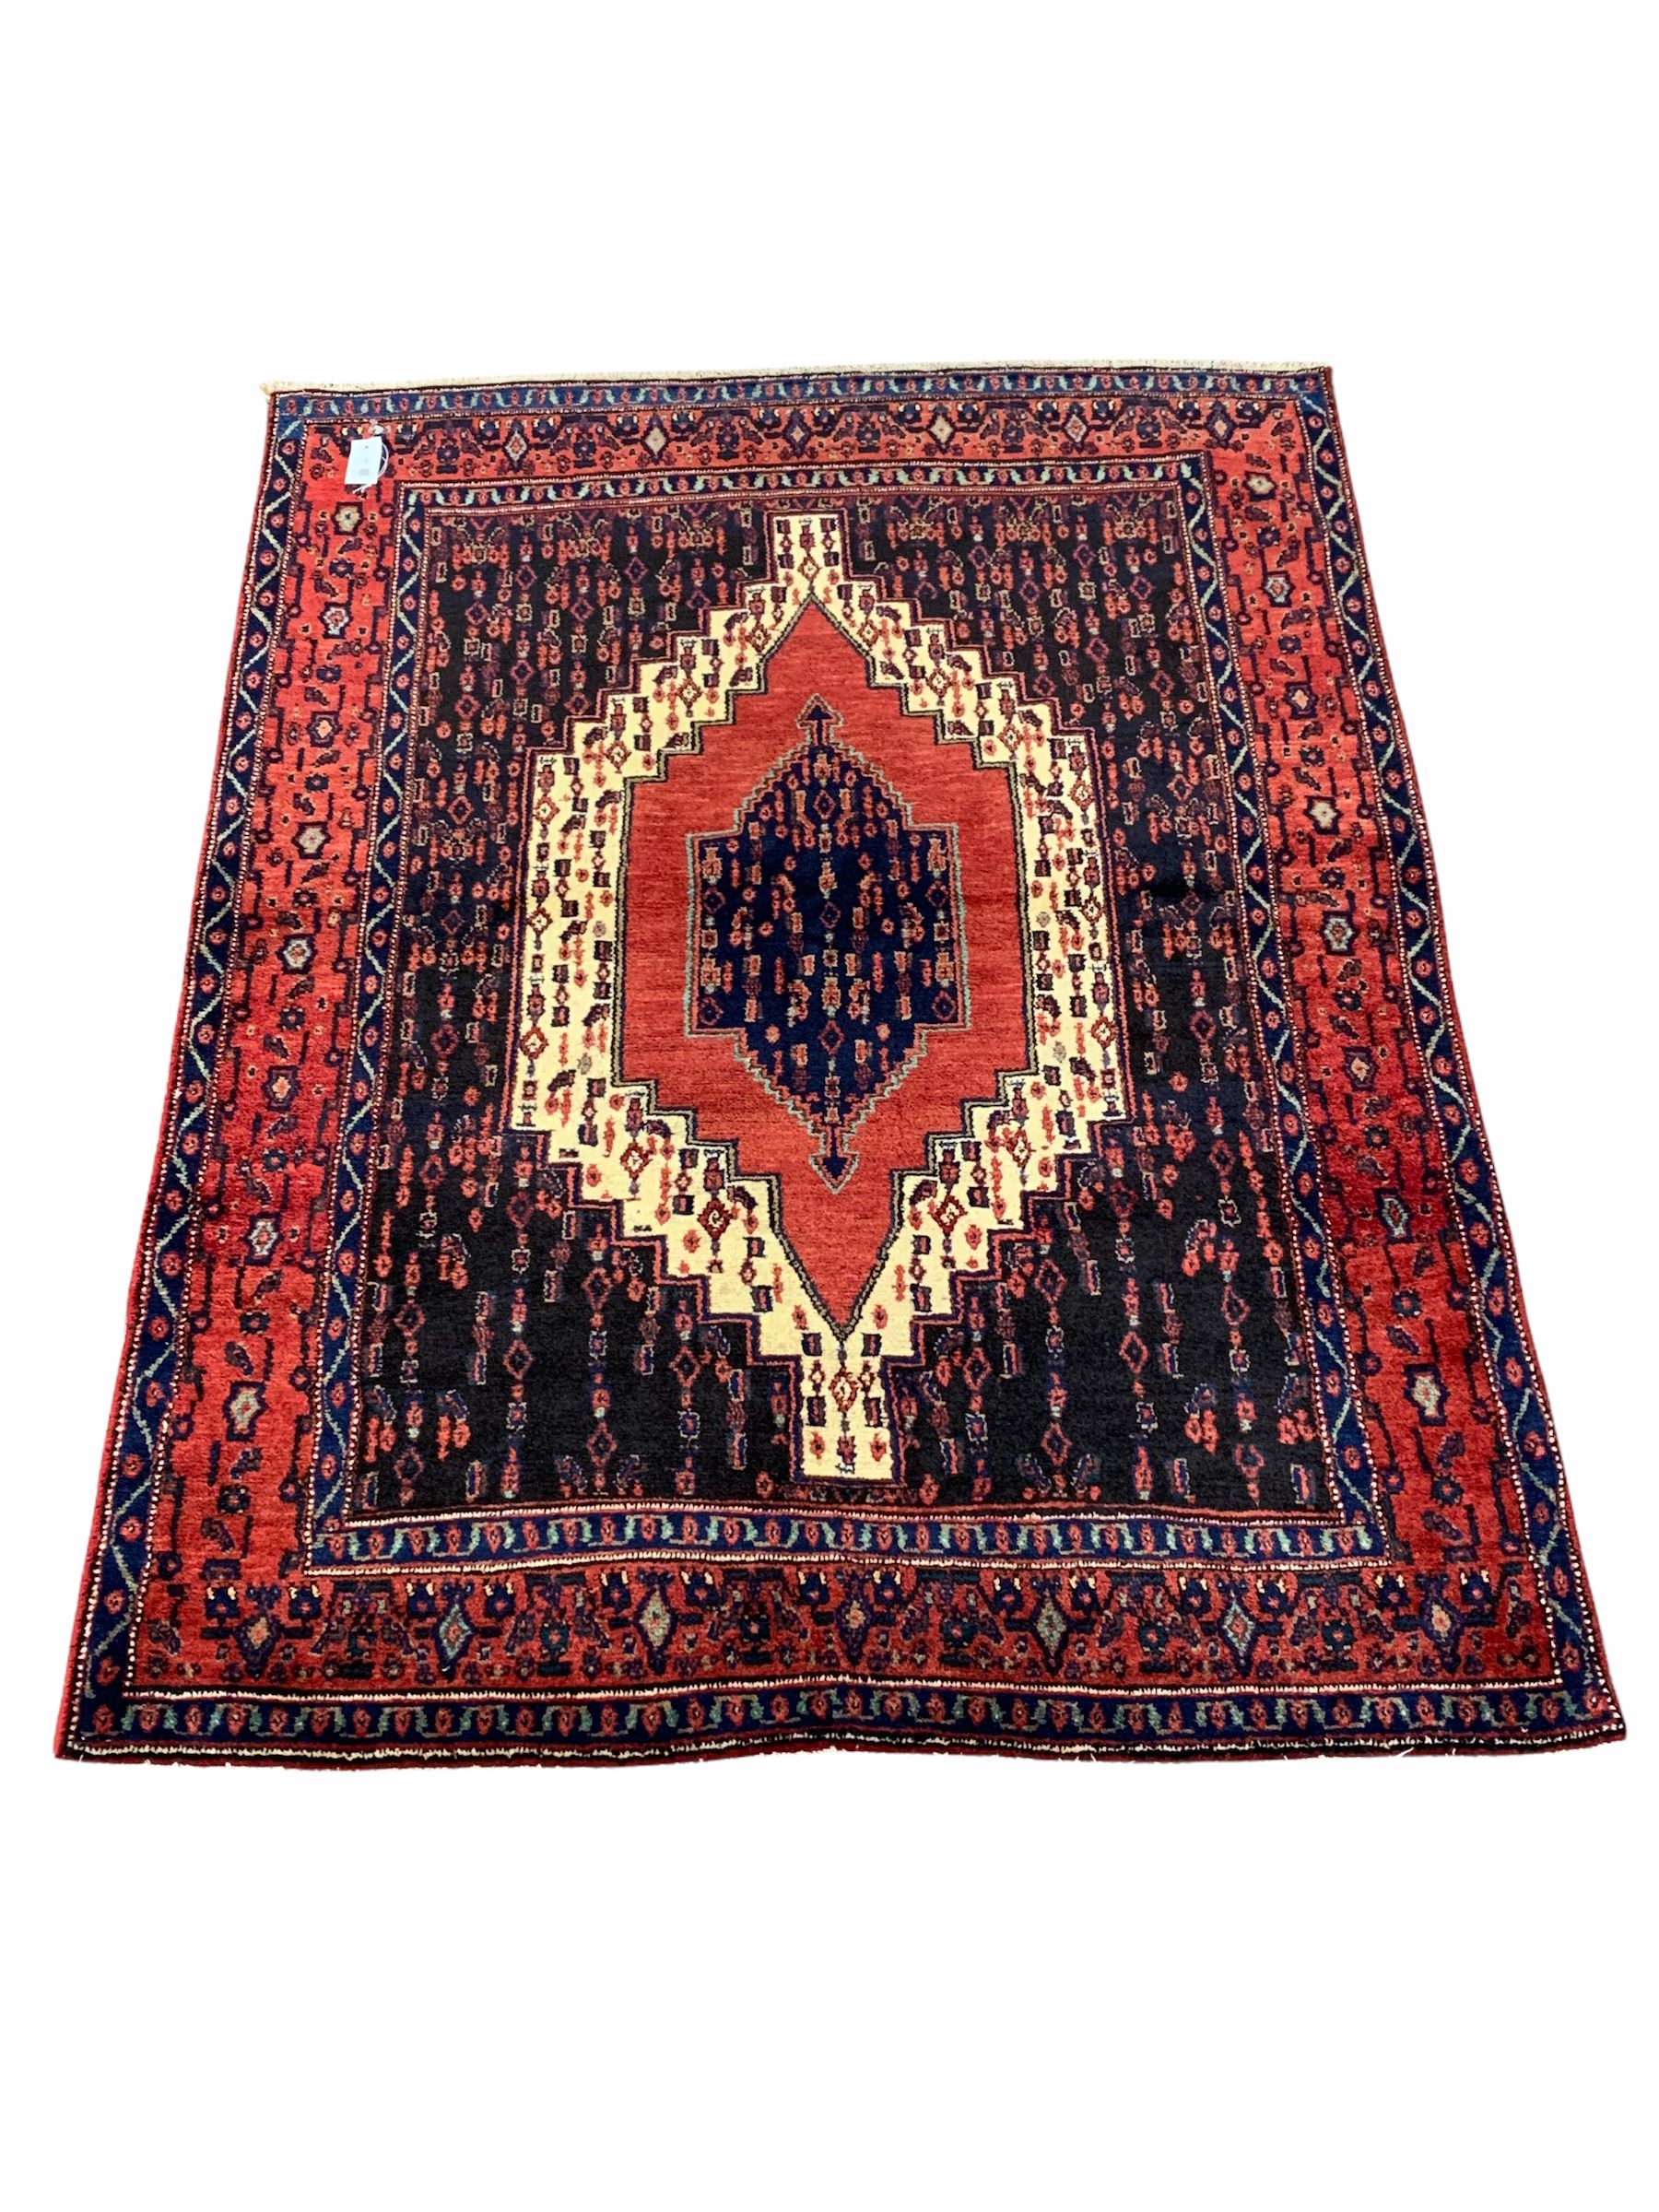 Persian senneh hand knotted red ground rug centred by a geometric medallion and bordered 165cm x 120